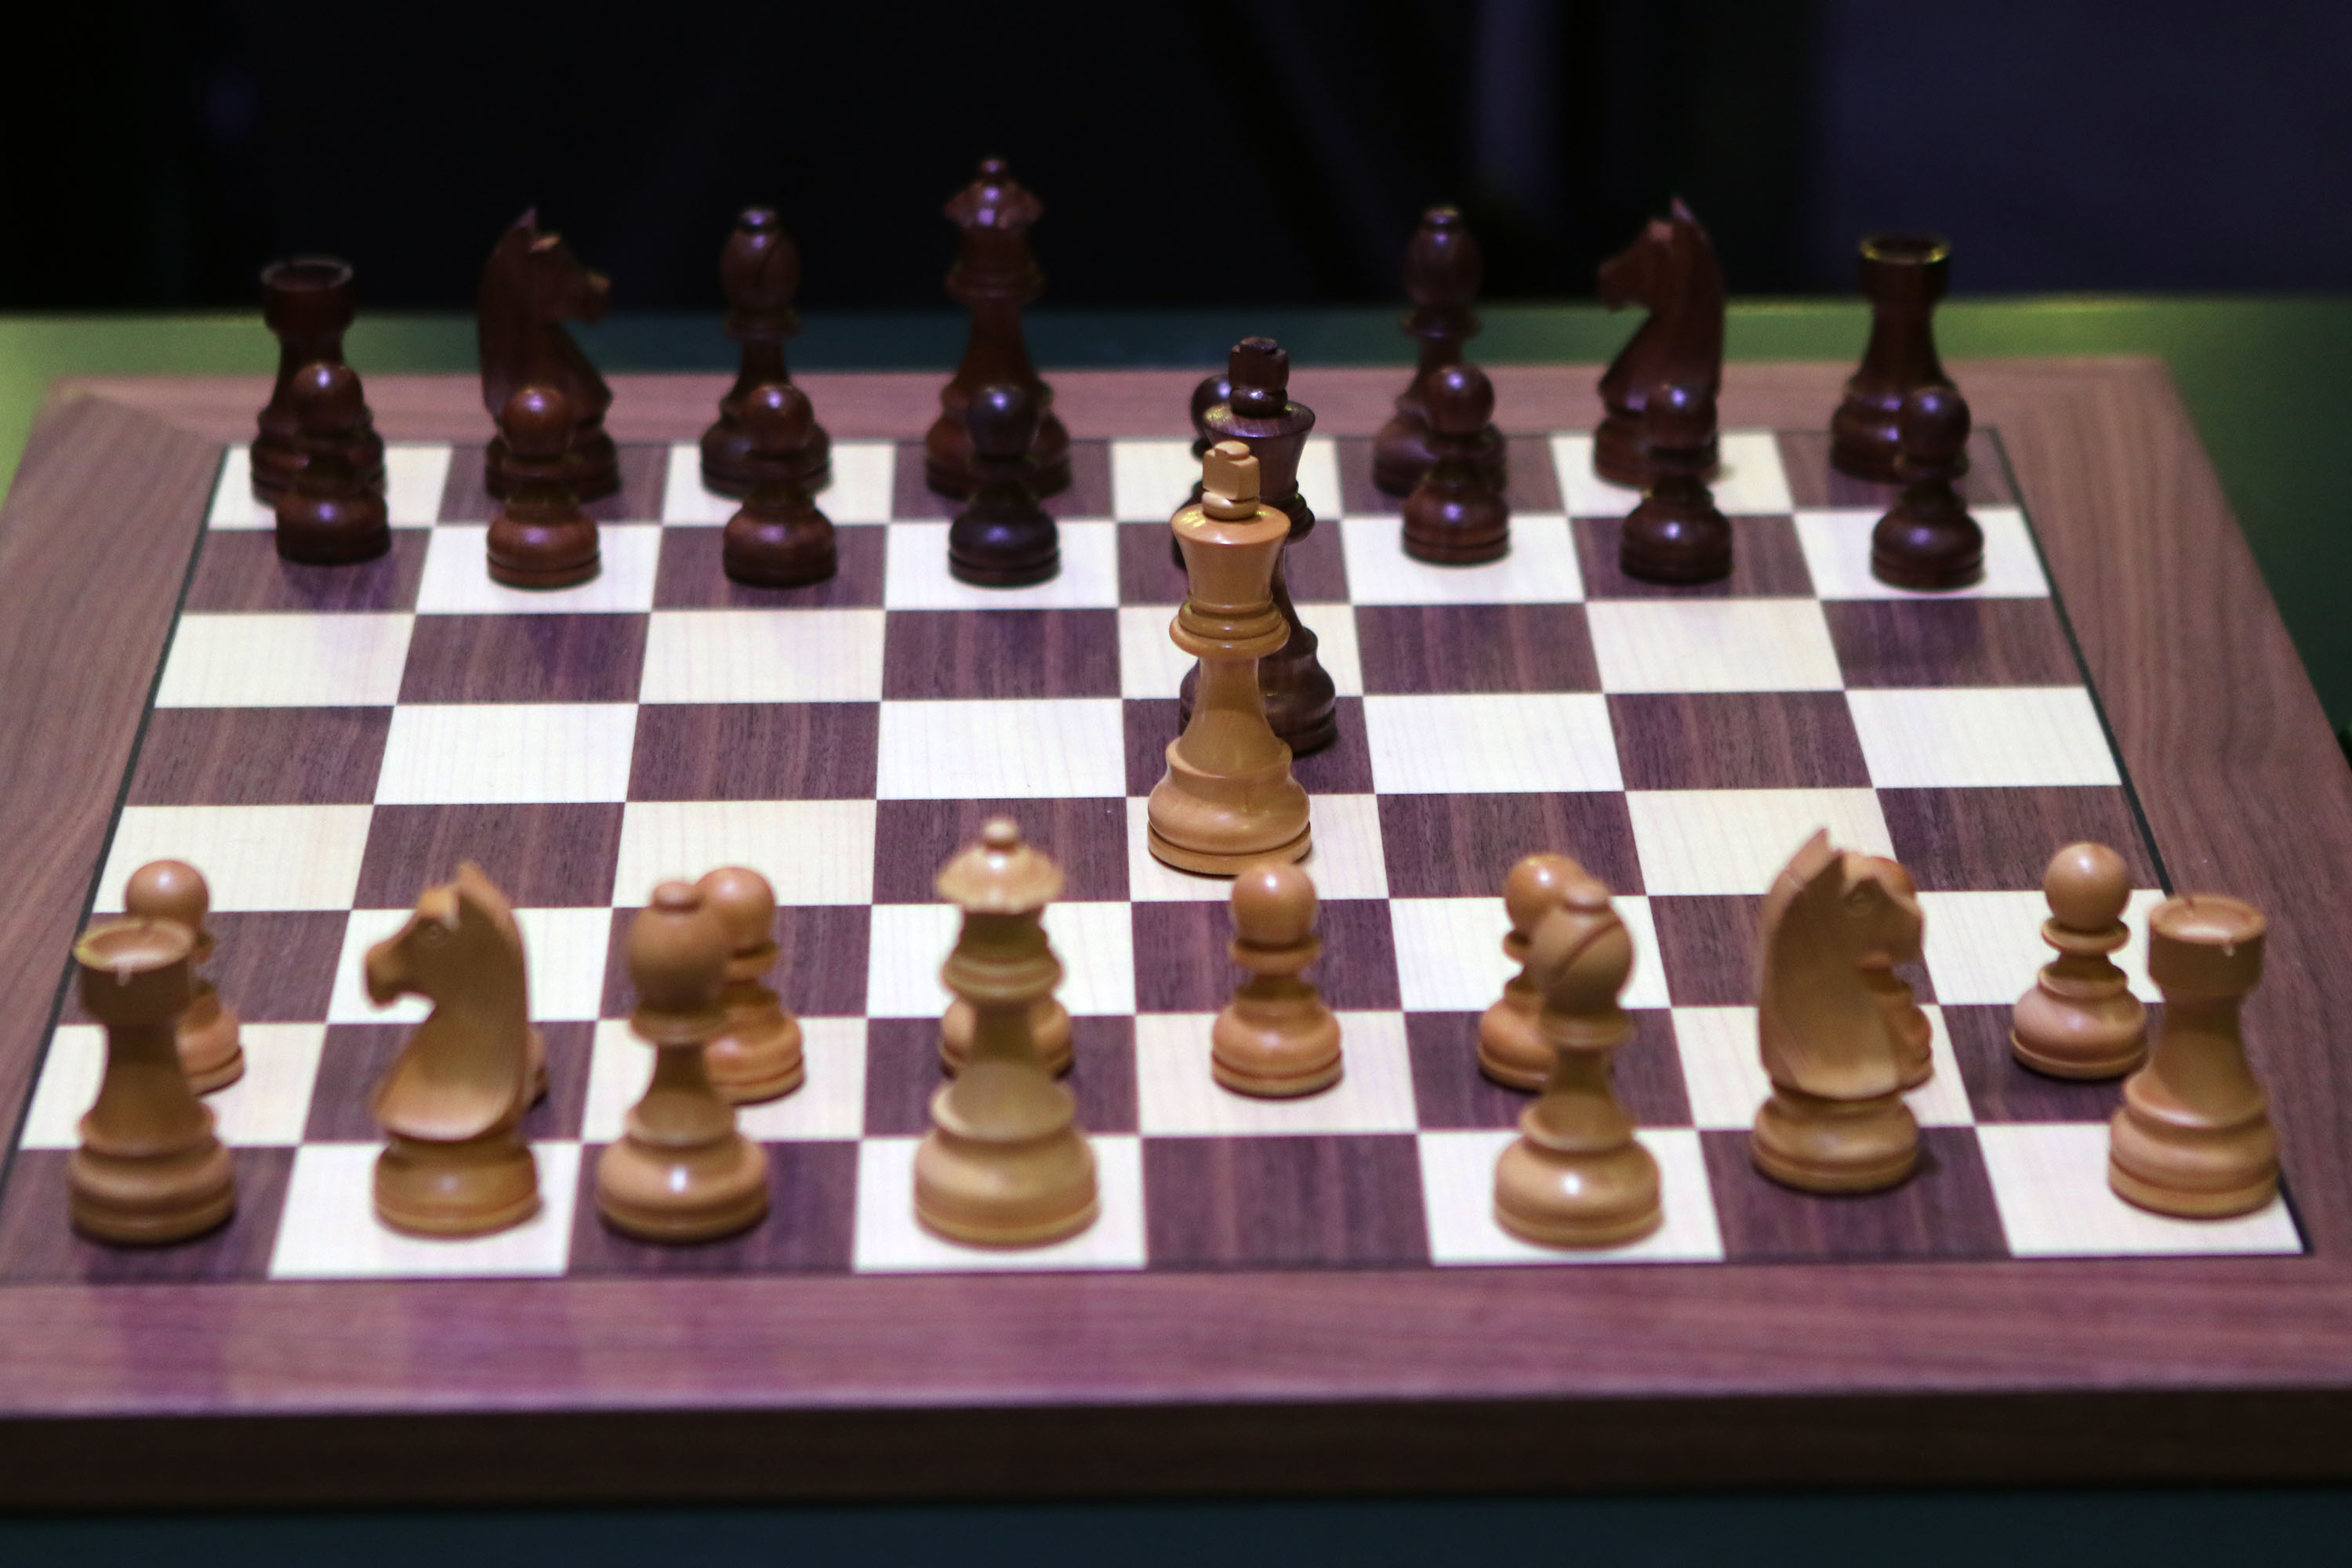 Chess to Become a Cyber Security Powerhouse